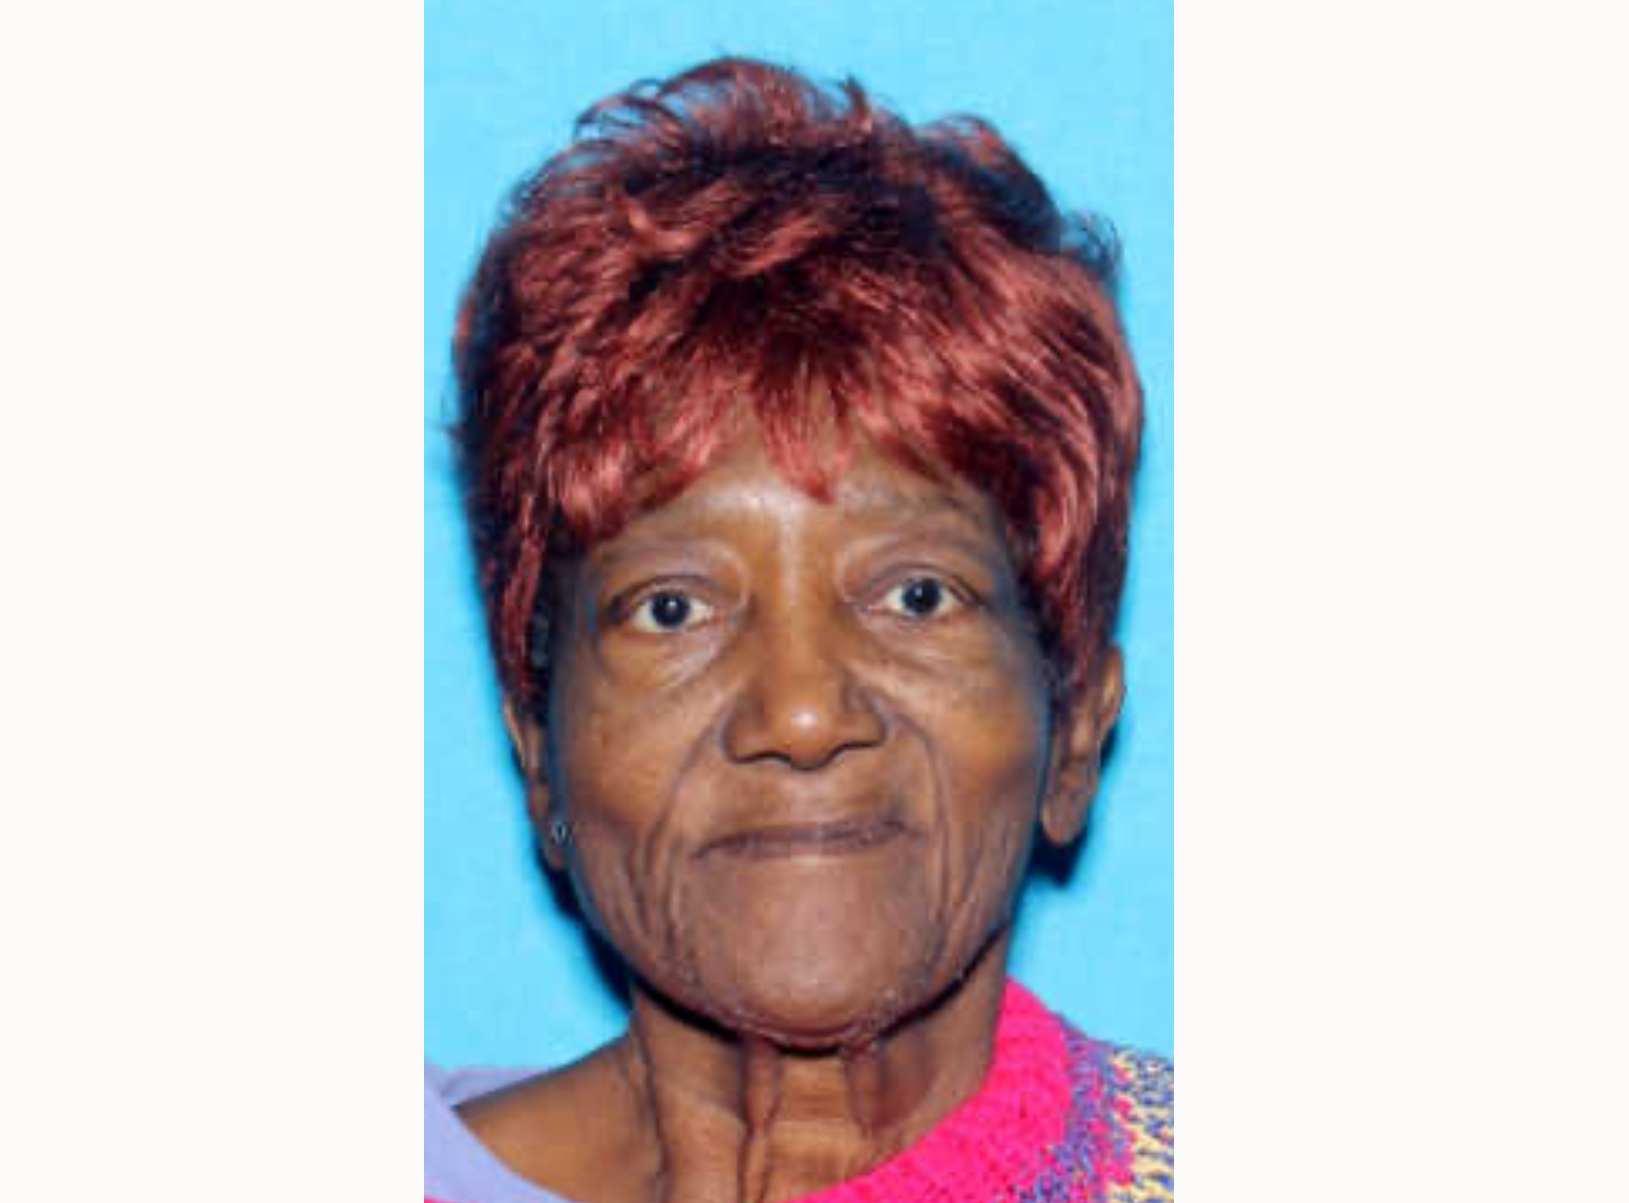 Missing Birmingham woman has been located and reunited with family